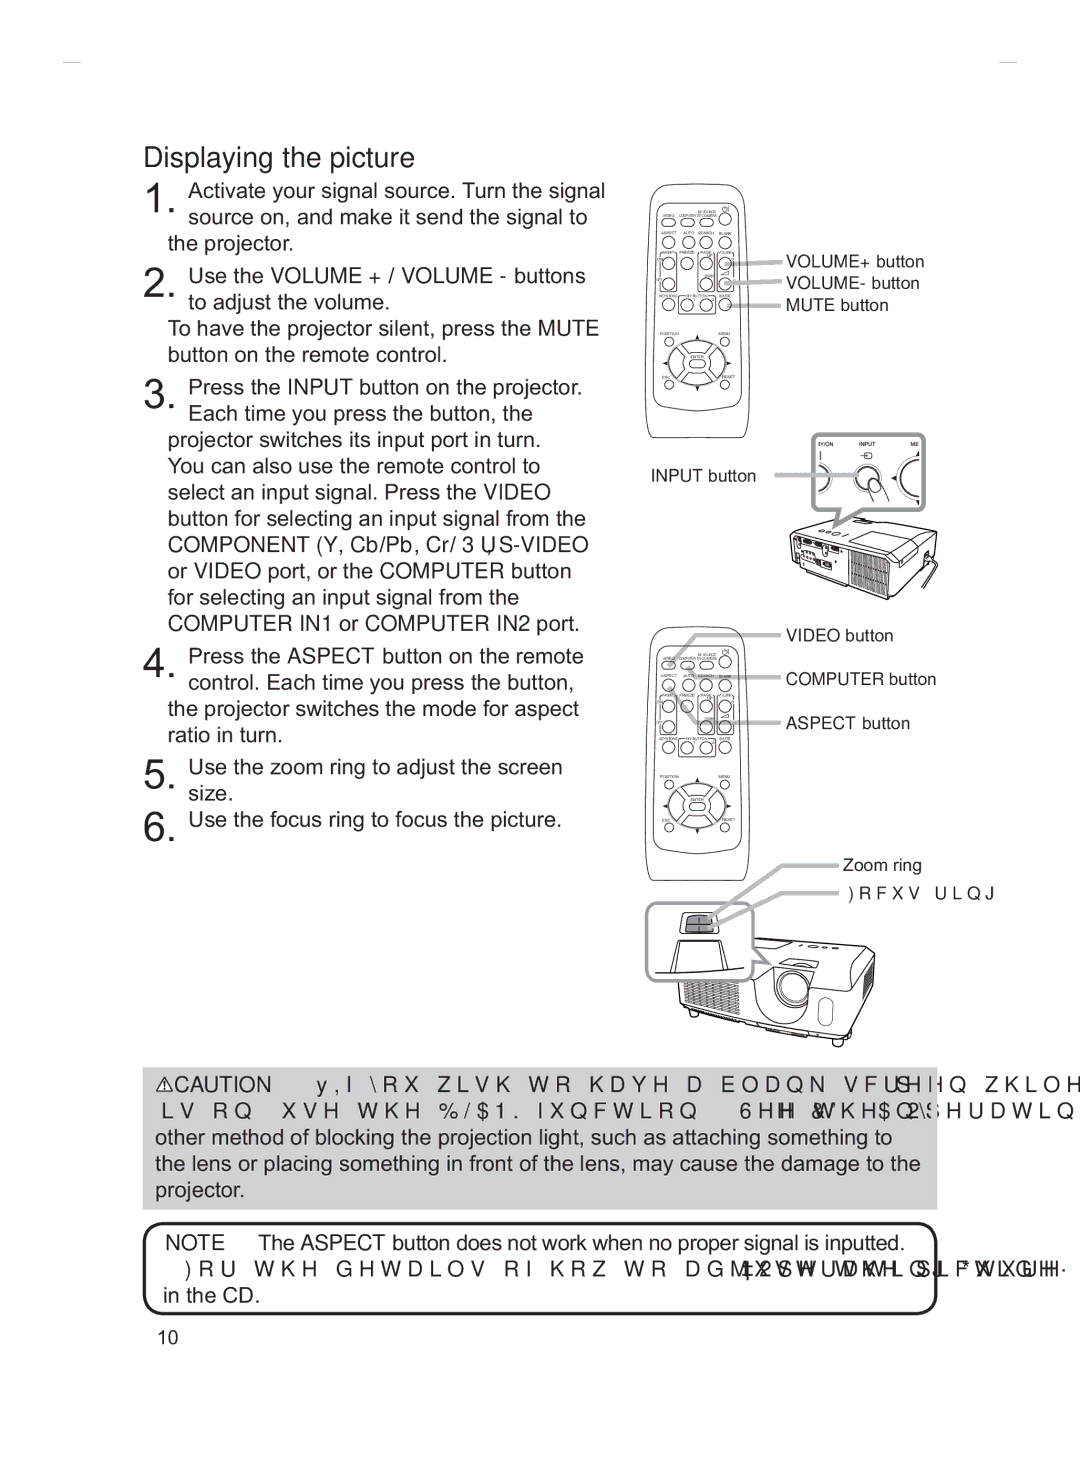 Hitachi CP-X3011, CP-X2011, CP-X3511, CP-X3010Z, CP-X2511 user manual Displaying the picture, Input button 